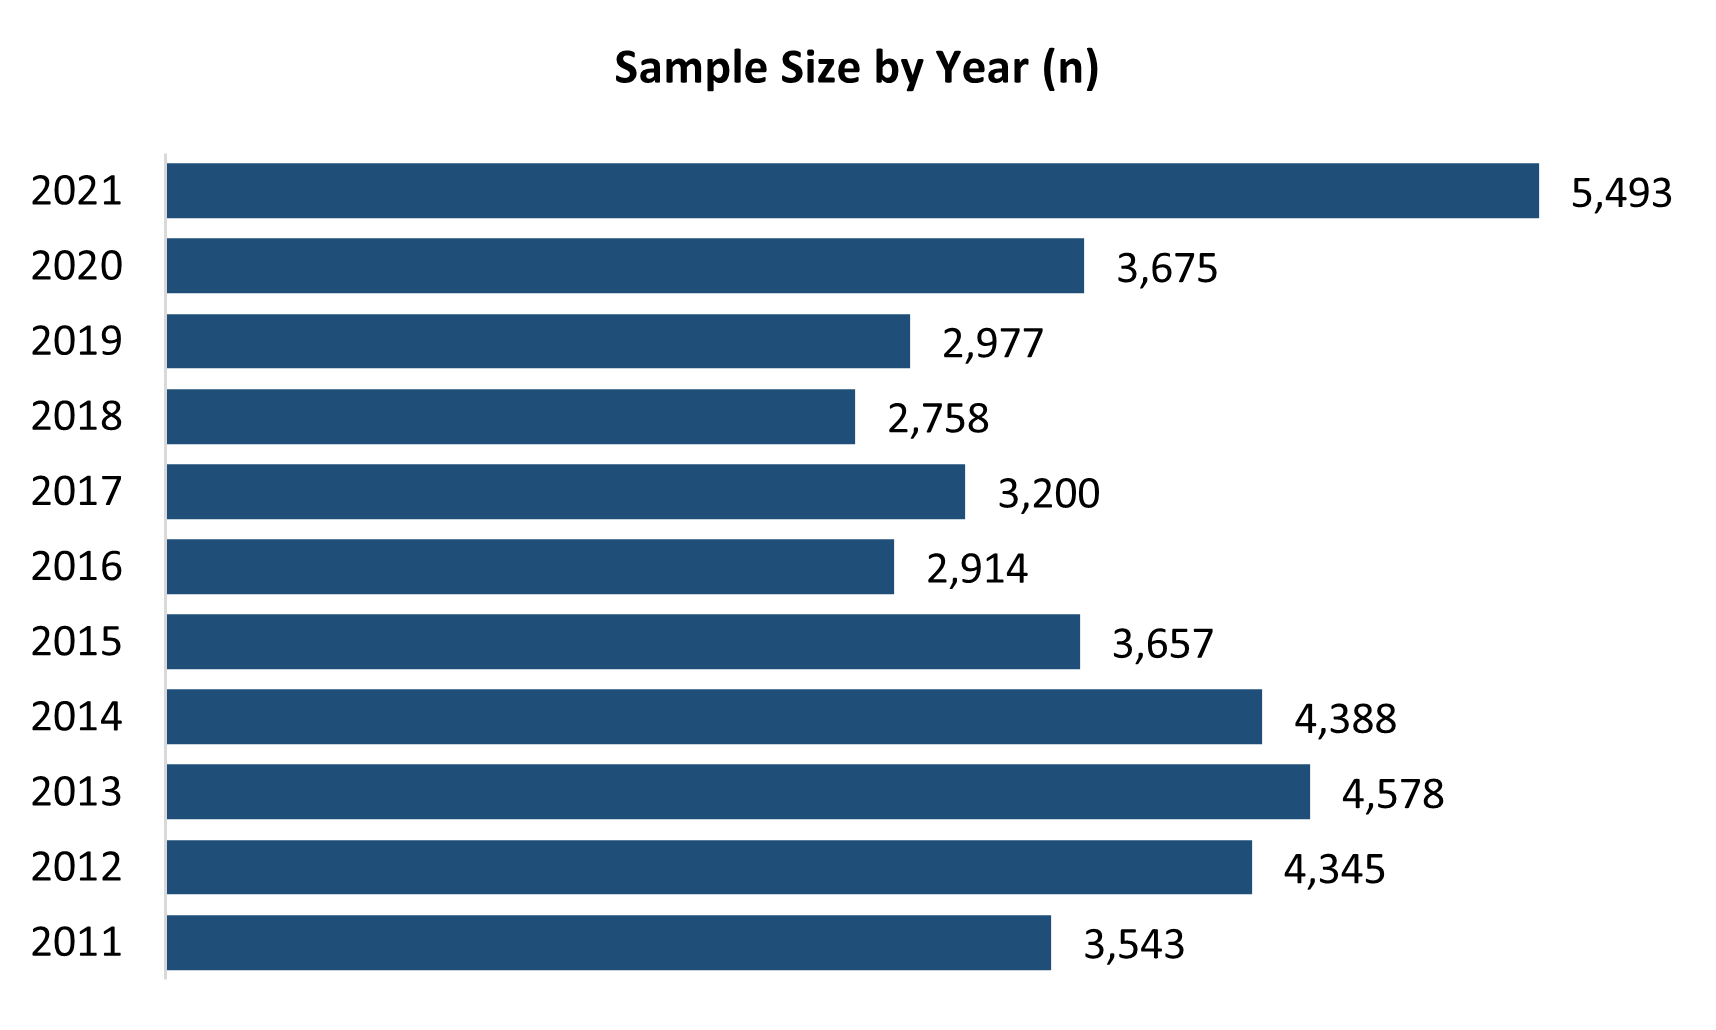 
Sample size by year (n): 2021 - 5,493; 2020 - 3,675; 2019 - 2,977;
2018 - 2,758;
2017 - 3,200;
2016 - 2,914;
2015 - 3,657;
2014 - 4,388;
2013 - 4,578;
2012 - 4,345; and
2011 - 3,543 